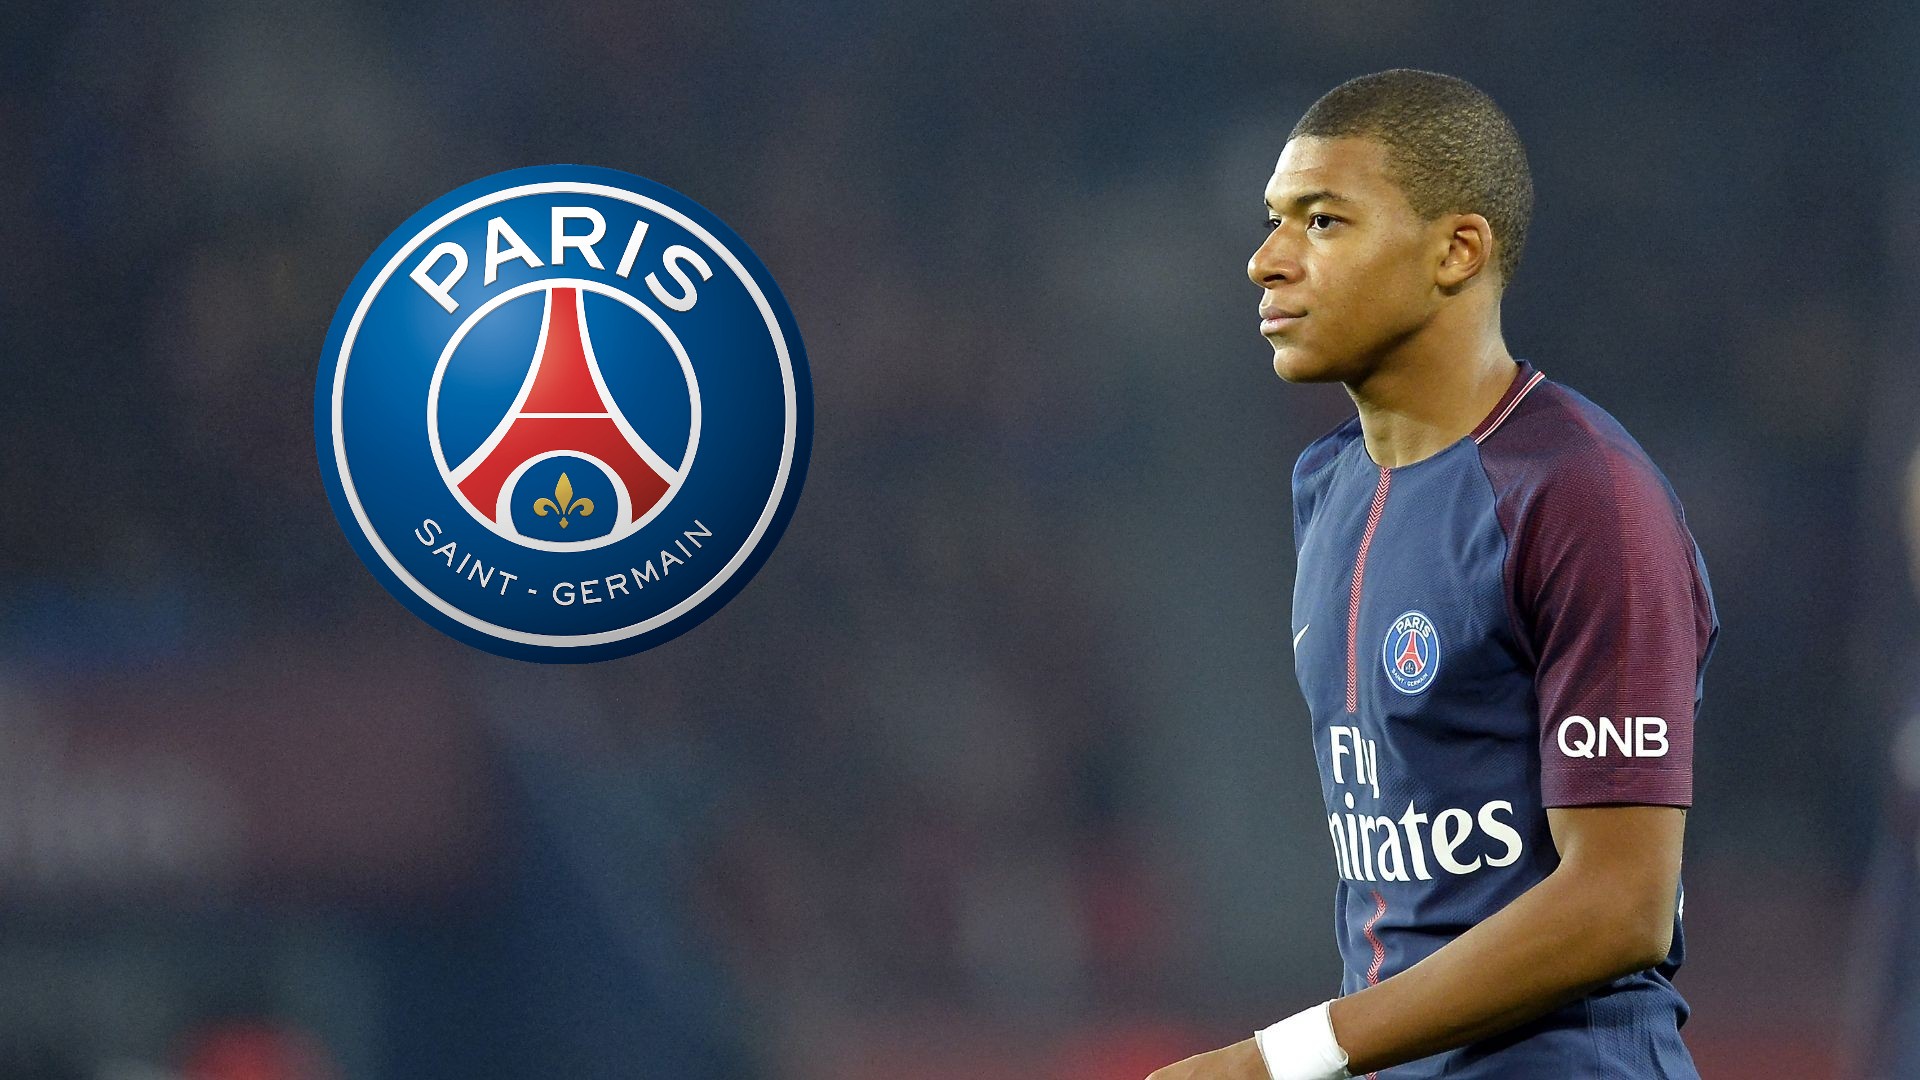 Kylian Mbappe PSG HD Wallpapers With Resolution 1920X1080 pixel. You can make this wallpaper for your Mac or Windows Desktop Background, iPhone, Android or Tablet and another Smartphone device for free